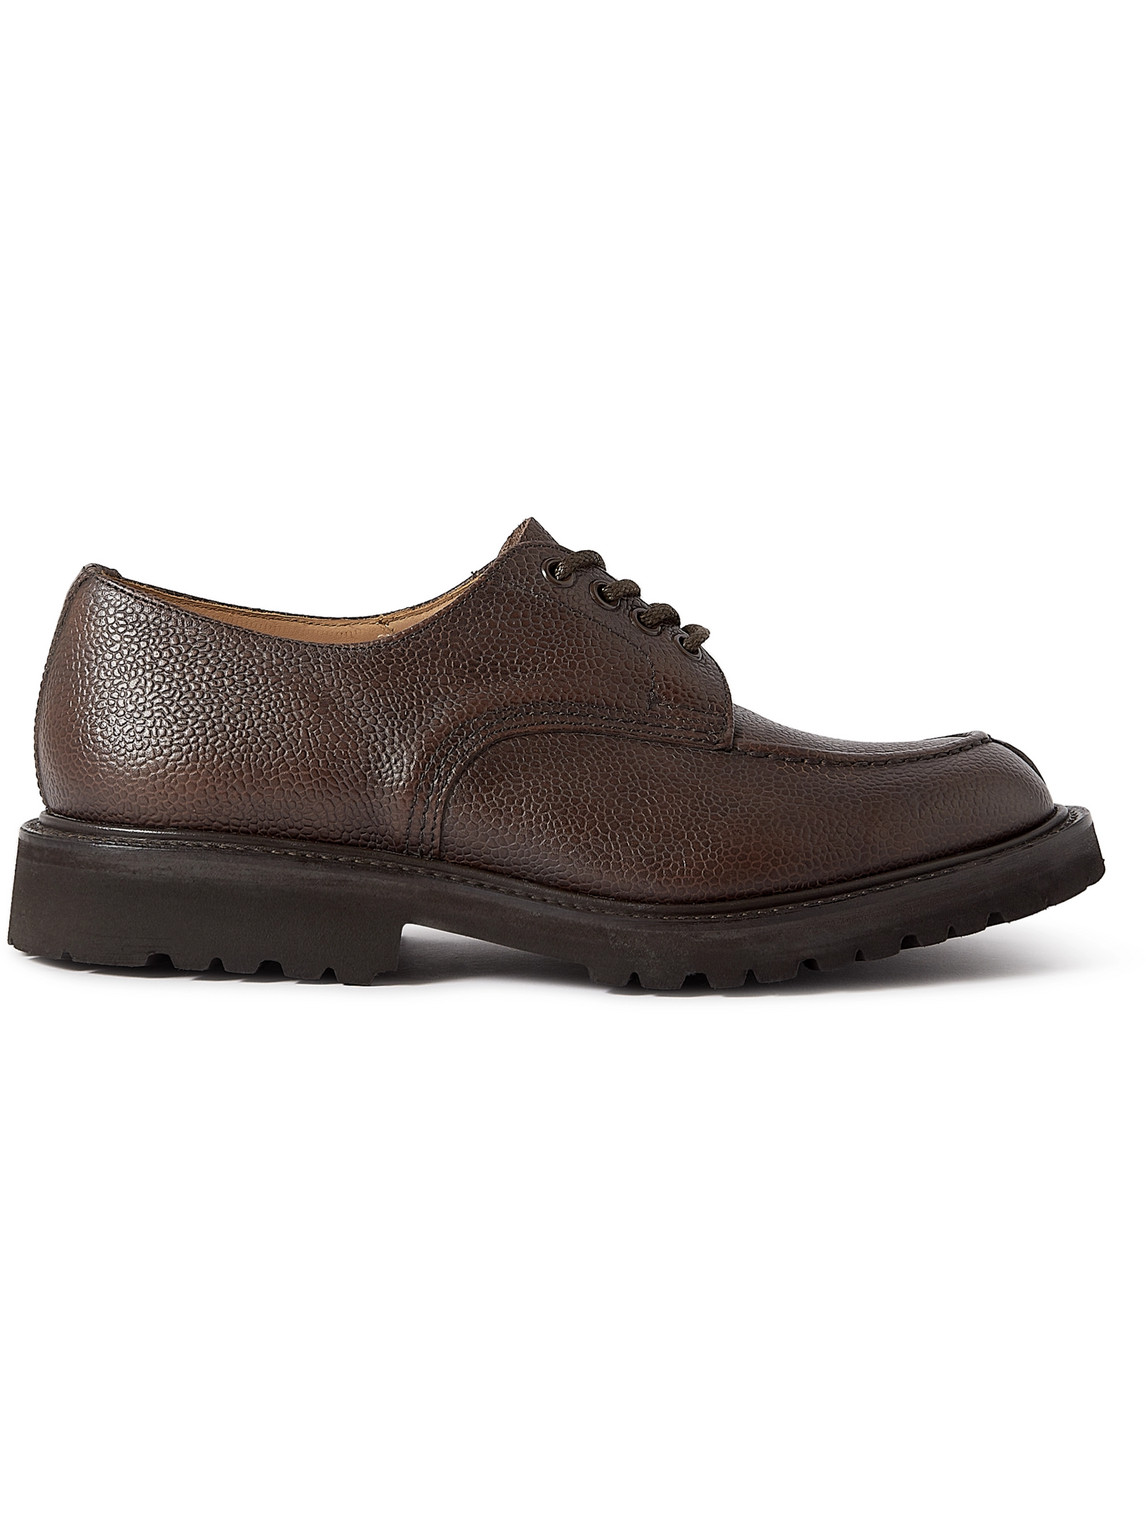 Tricker's Kilsby Full-grain Leather Oxford Shoes In Brown